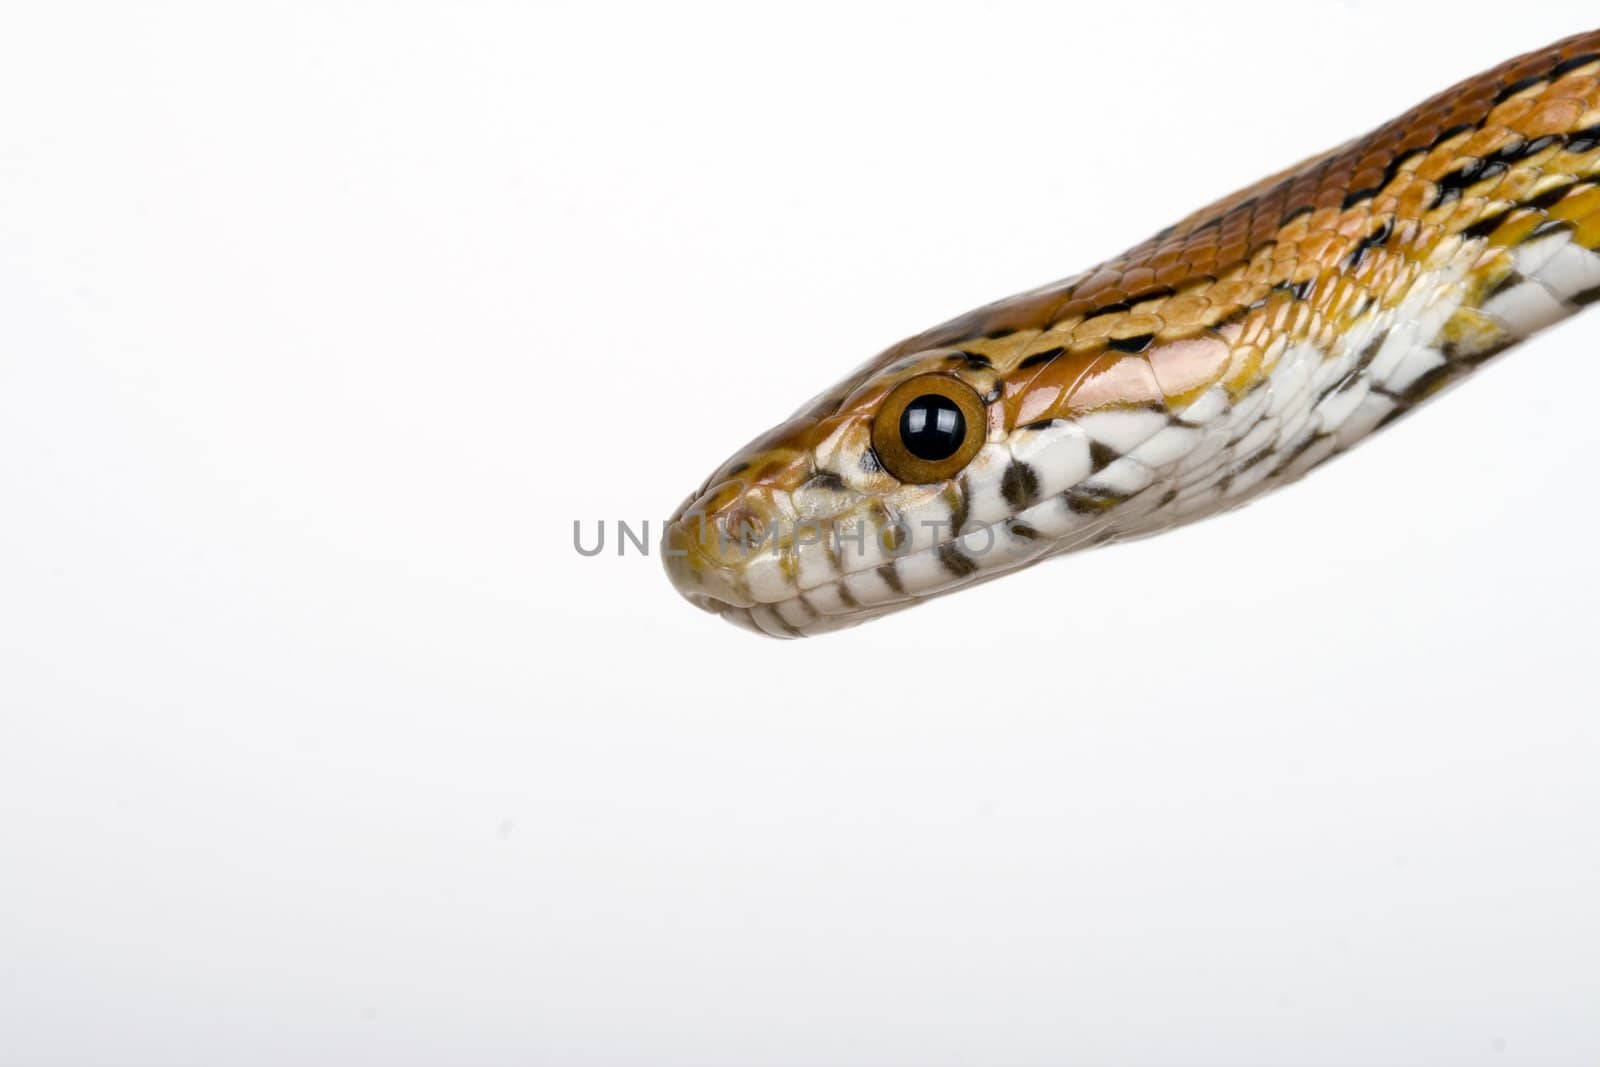 photograph of a harmless corn snake on a white background